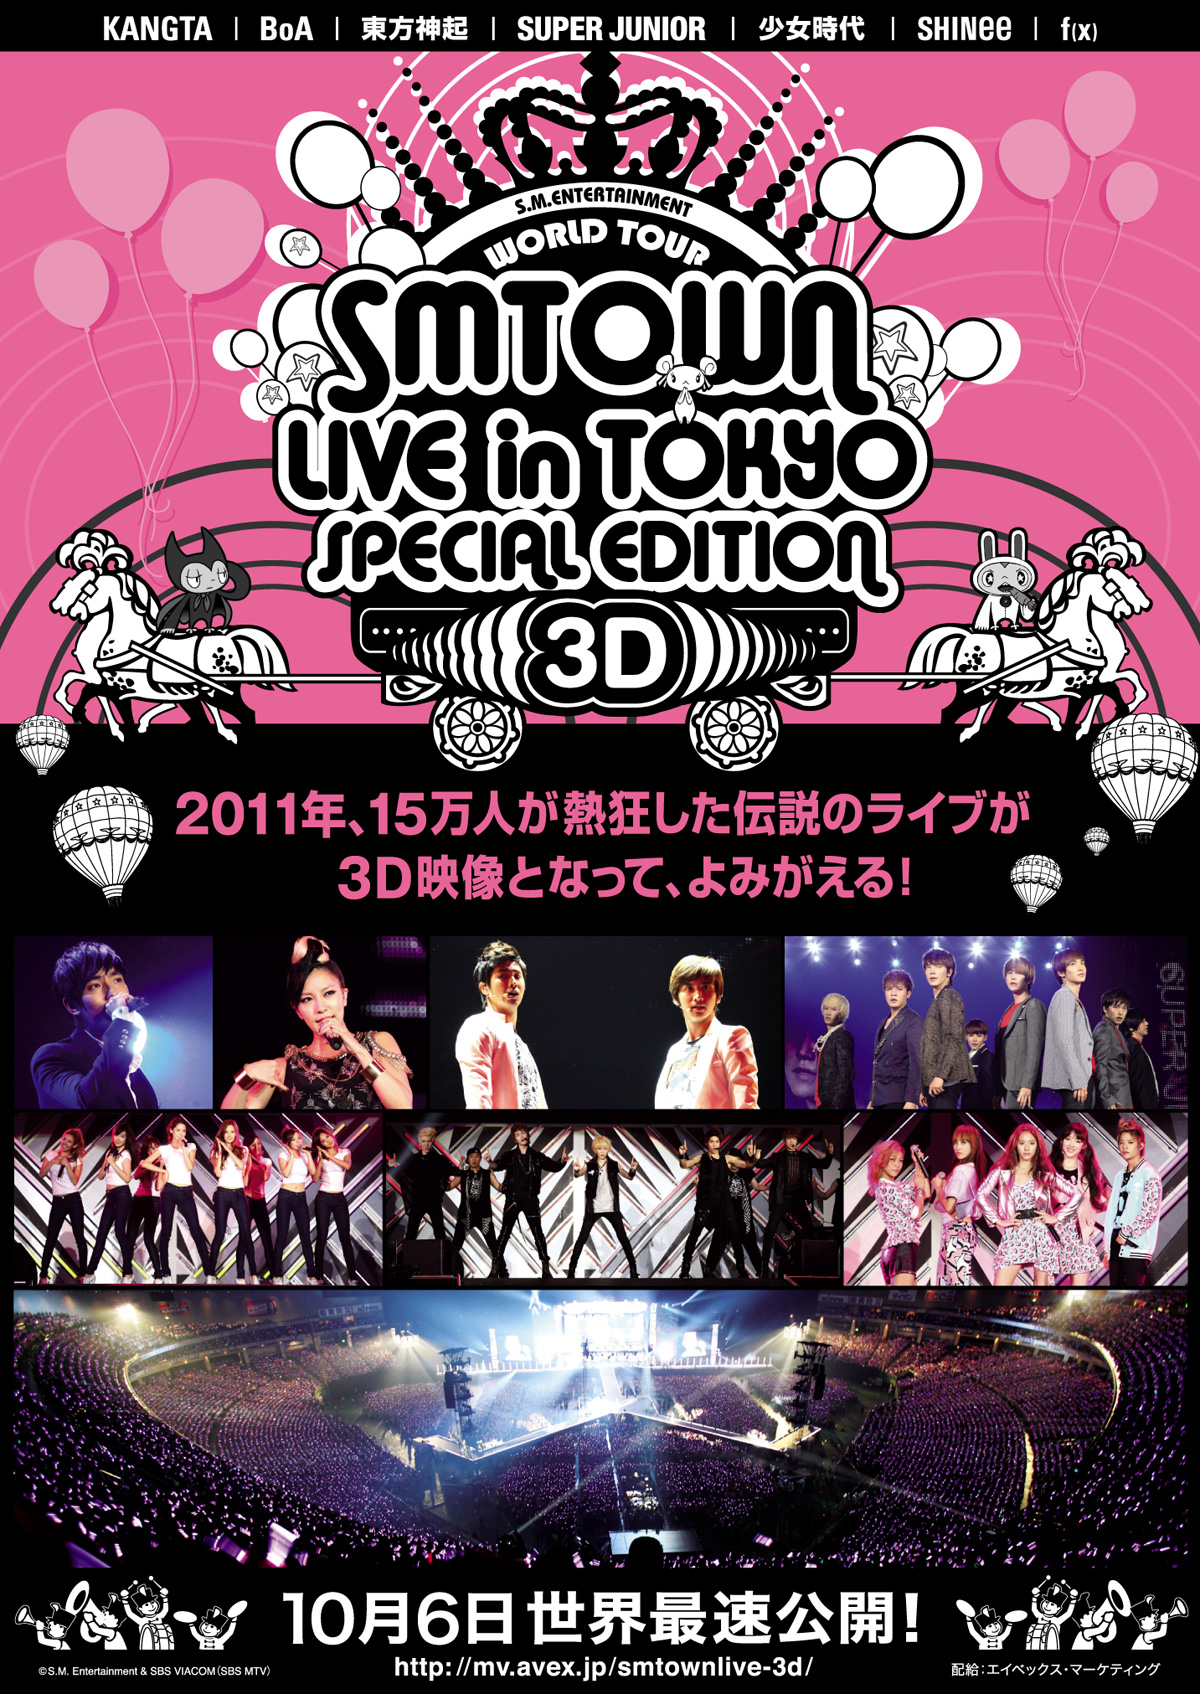 SMTOWN LIVE in TOKYO SPECIAL EDITION 3Dの画像